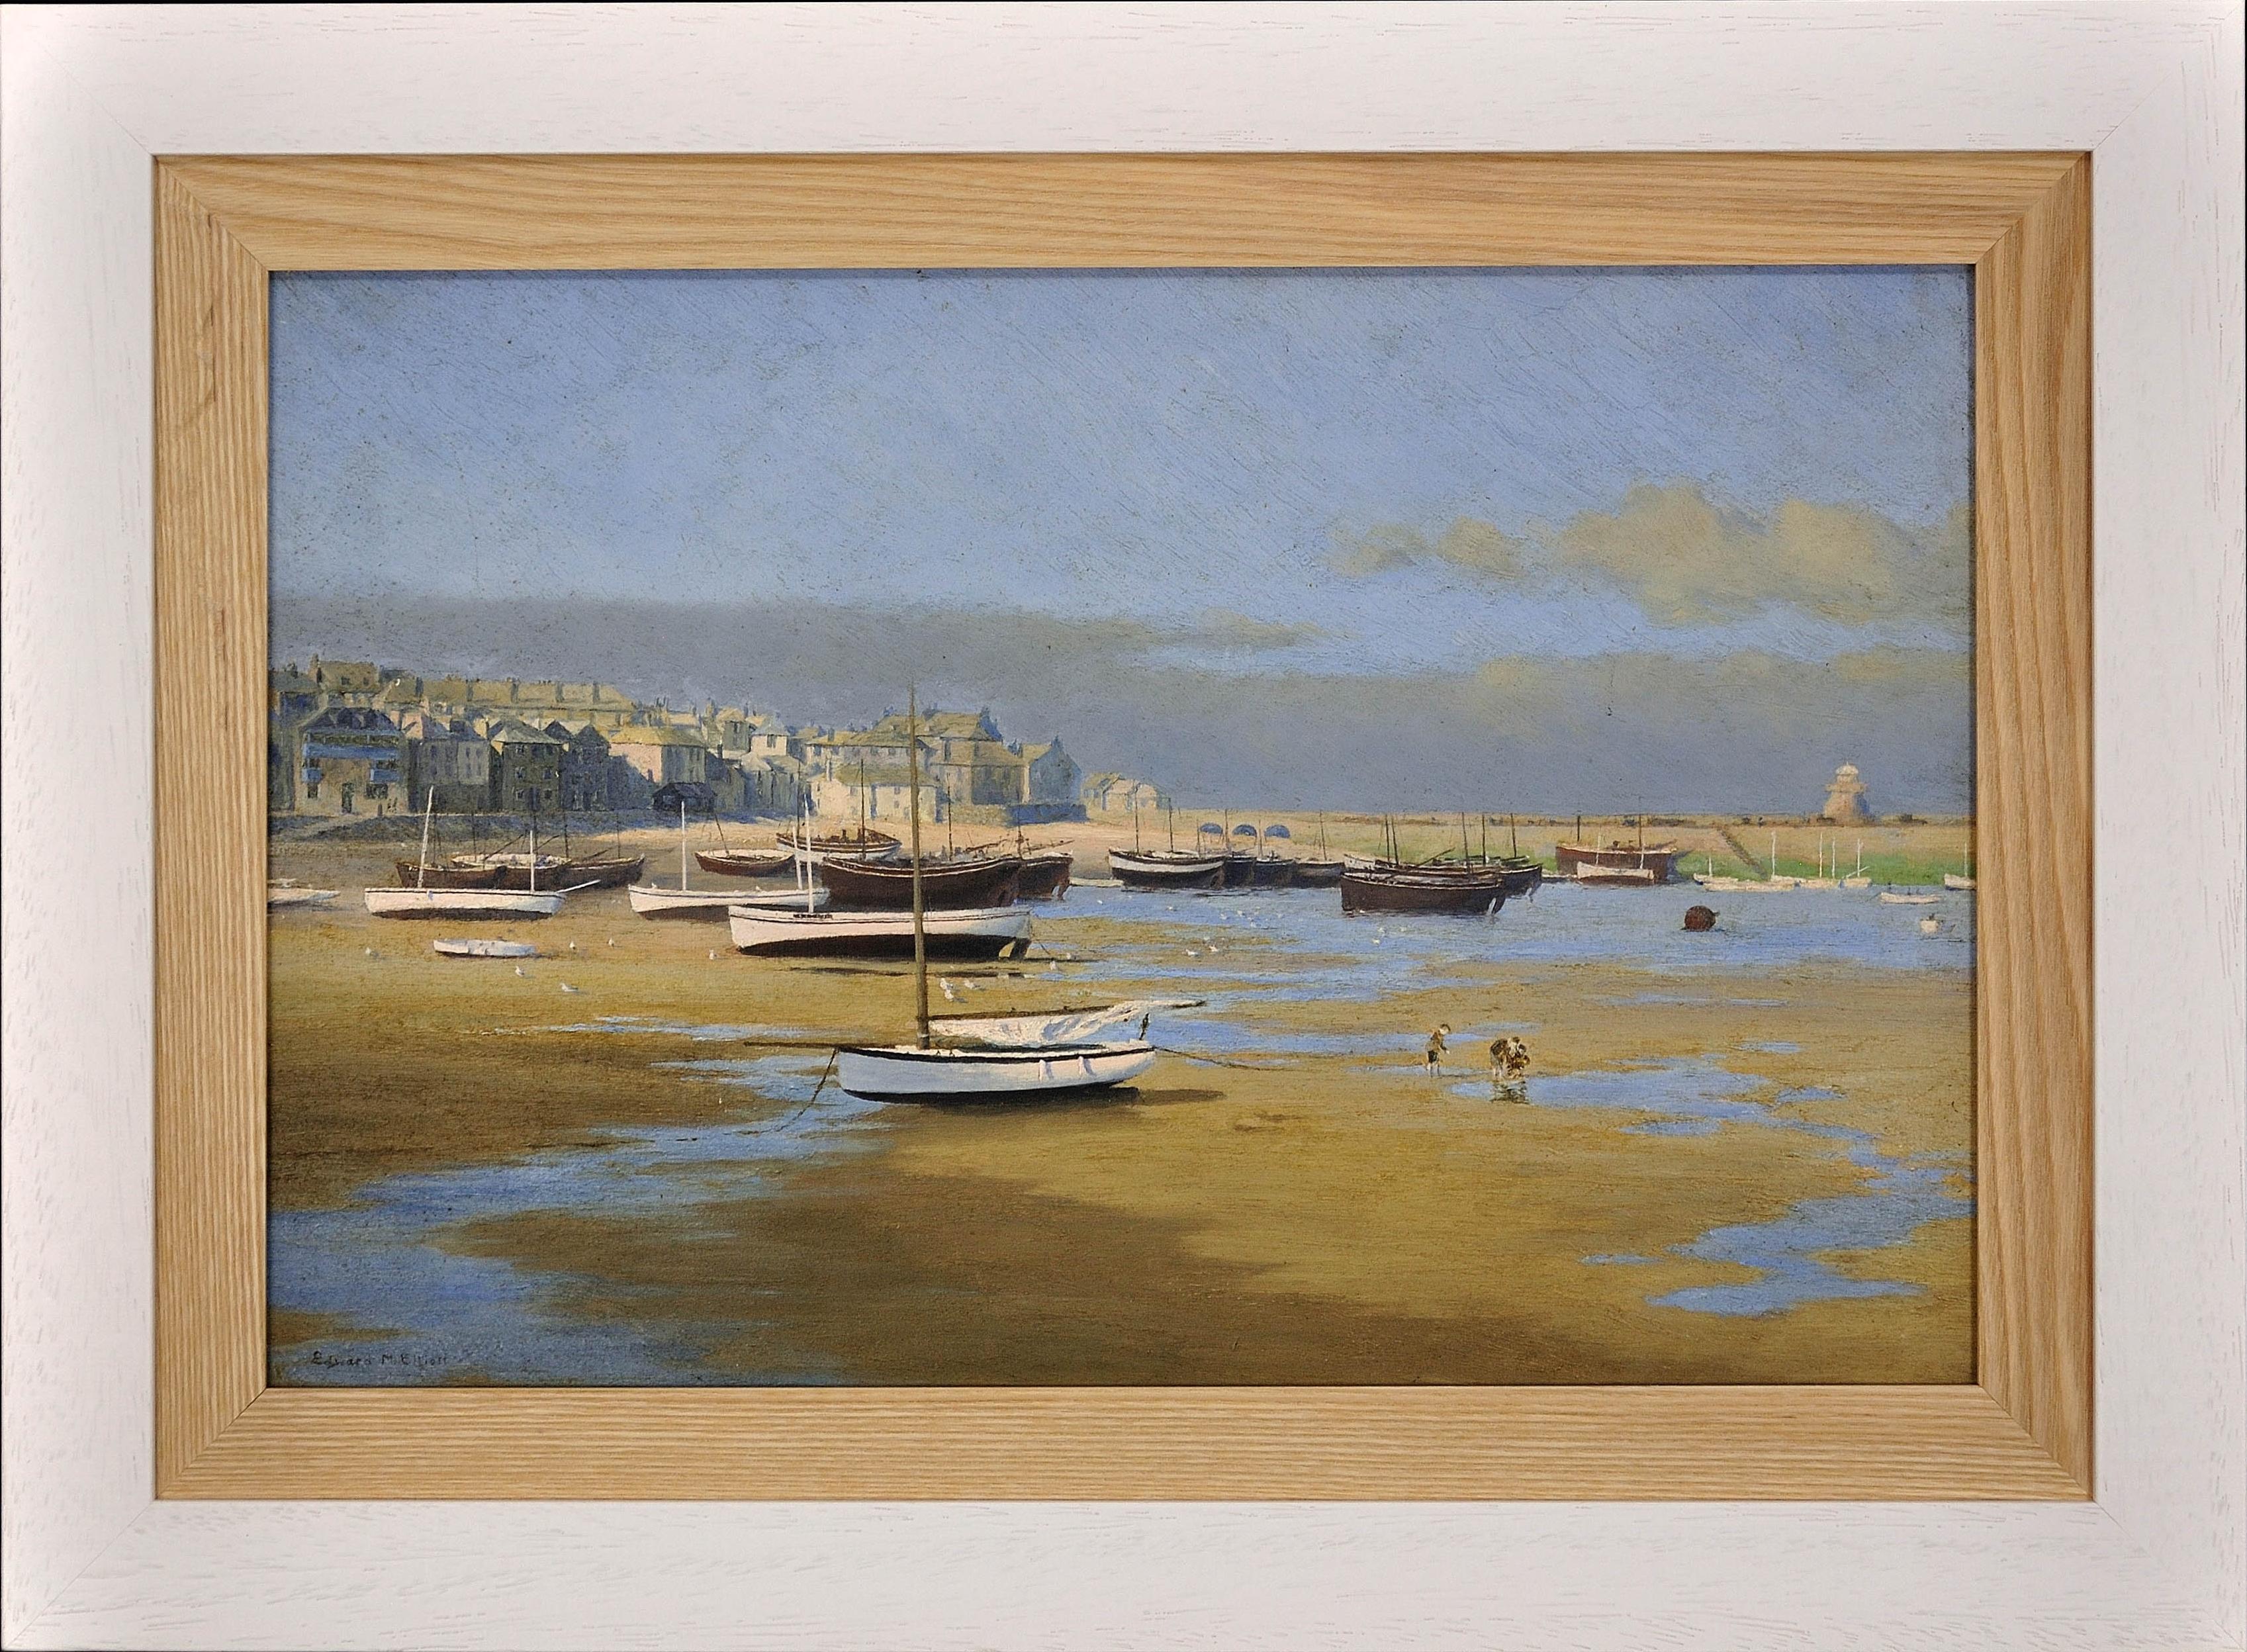 St Ives Harbor at Low Tide. Smeaton’s Pier. Edwardian Cornwall. Original Oil.